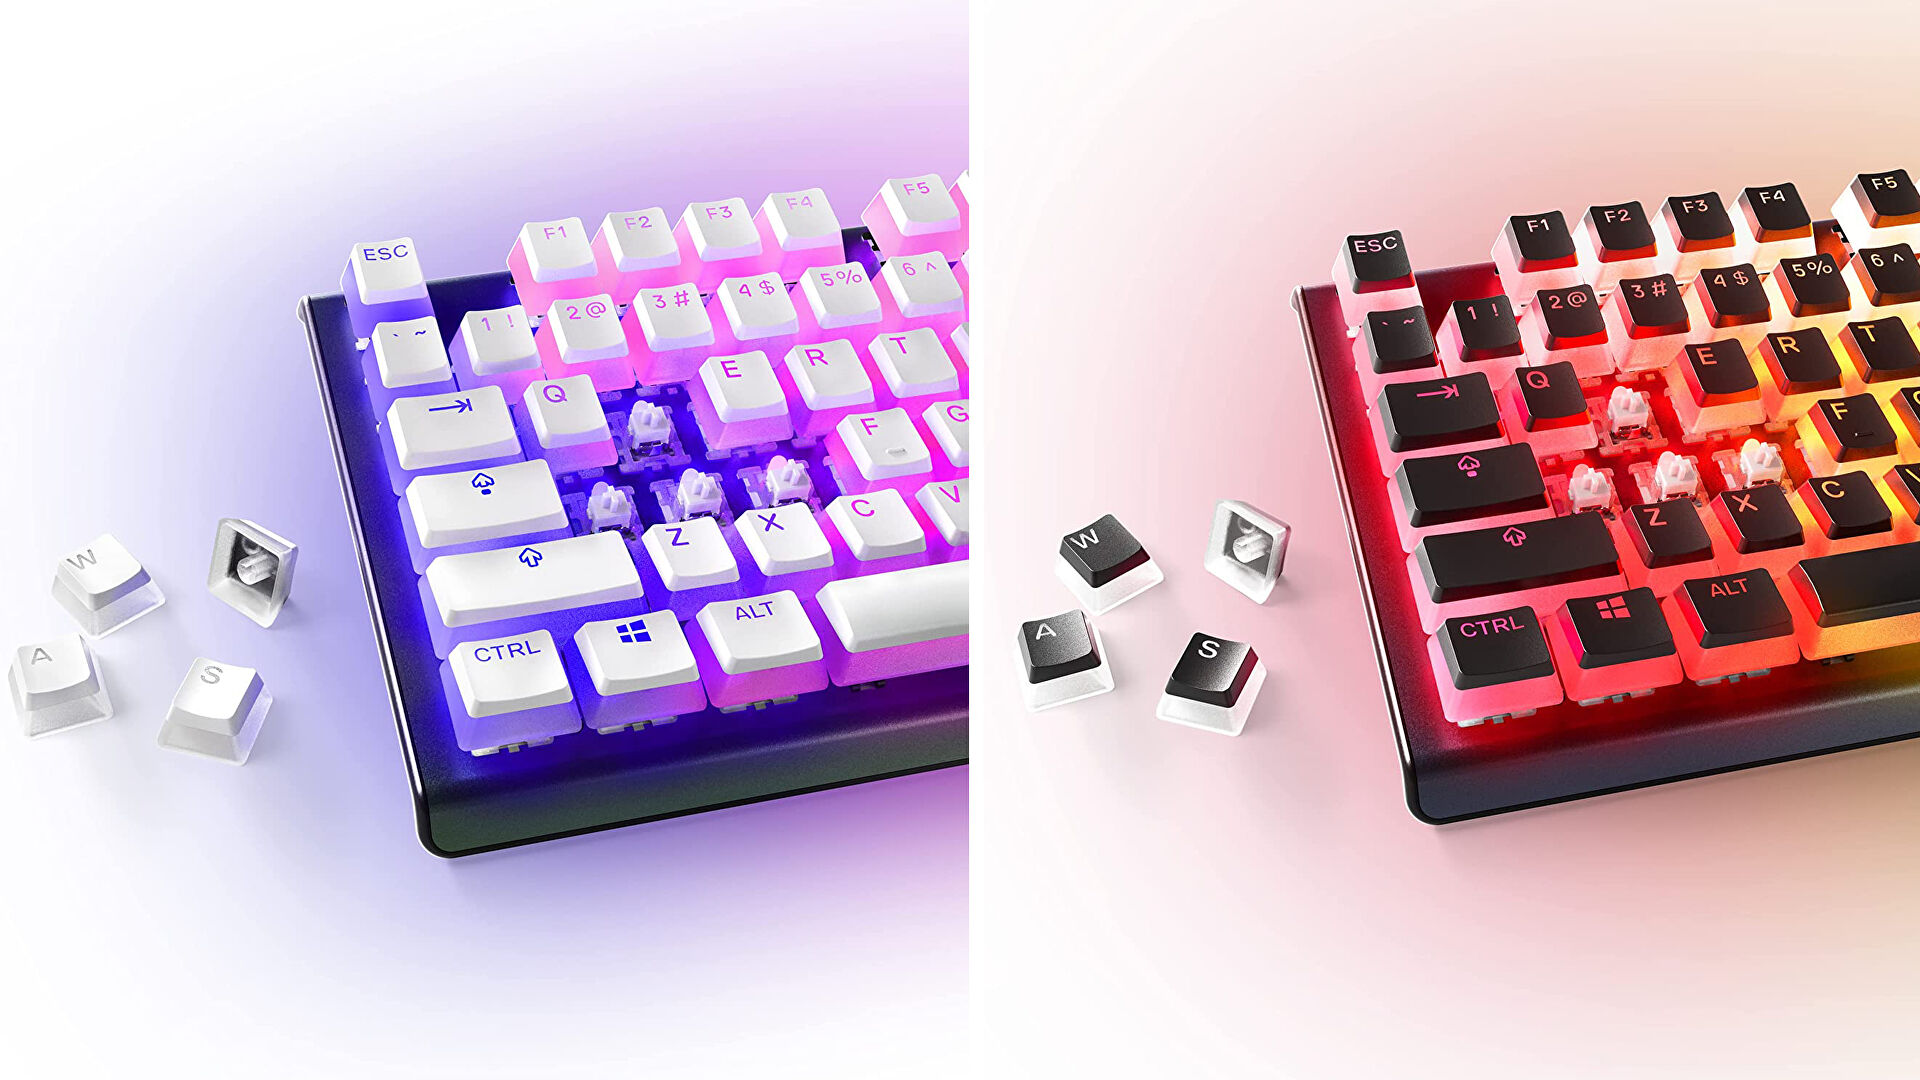 Upgrade your mechanical keyboard with these SteelSeries ‘pudding’ keycaps for $15 (50% off)